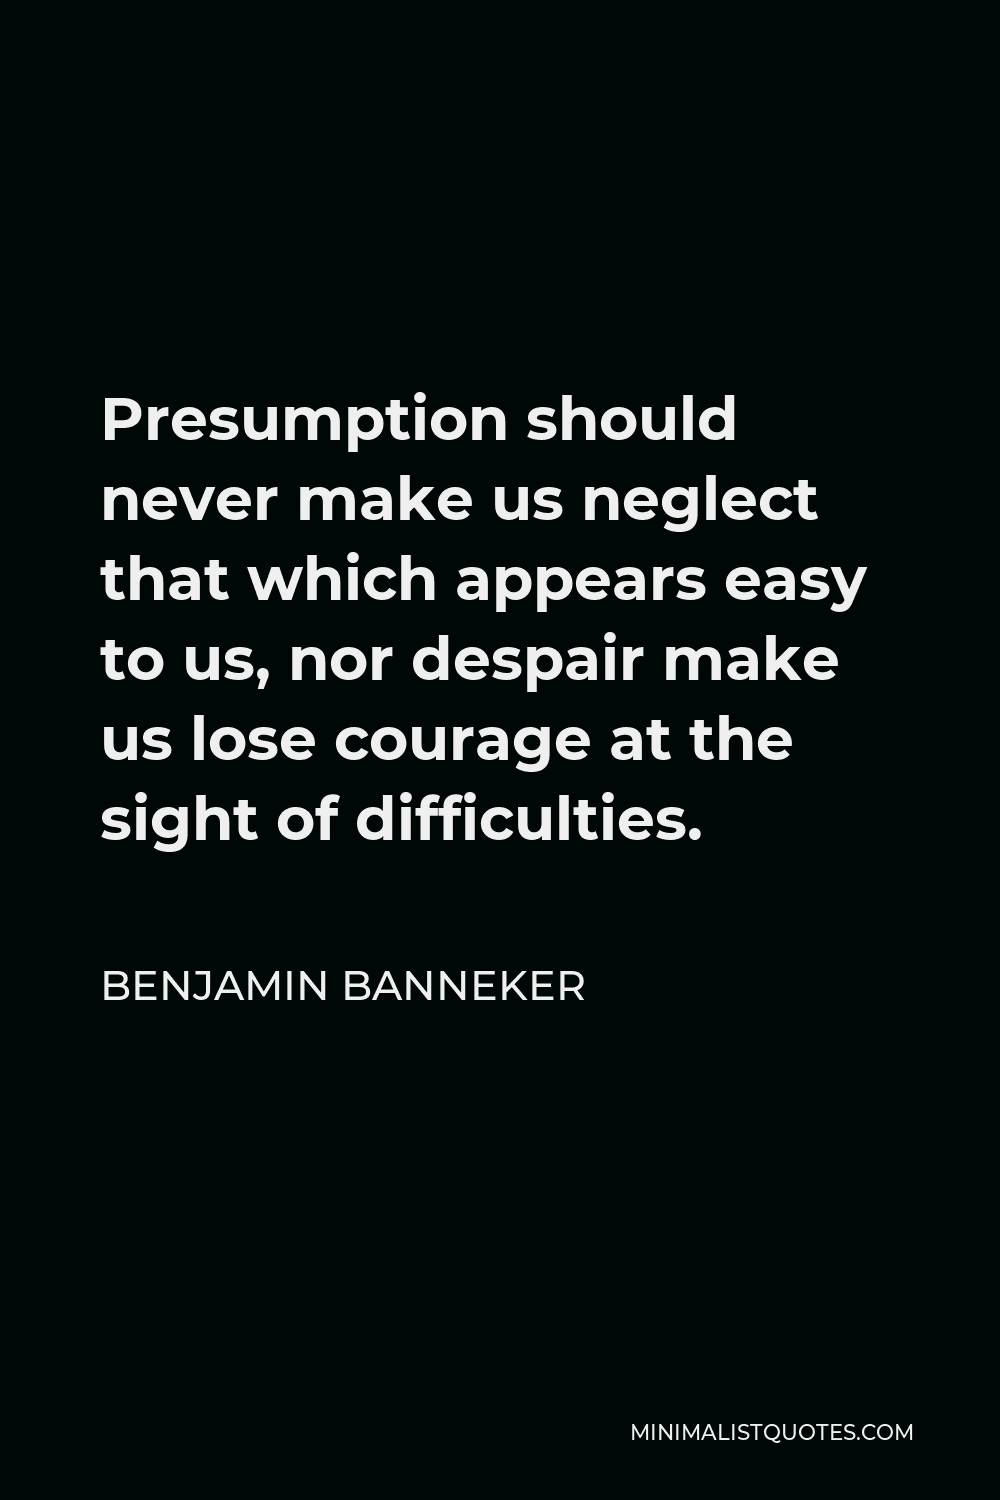 Benjamin Banneker Quote - Presumption should never make us neglect that which appears easy to us, nor despair make us lose courage at the sight of difficulties.